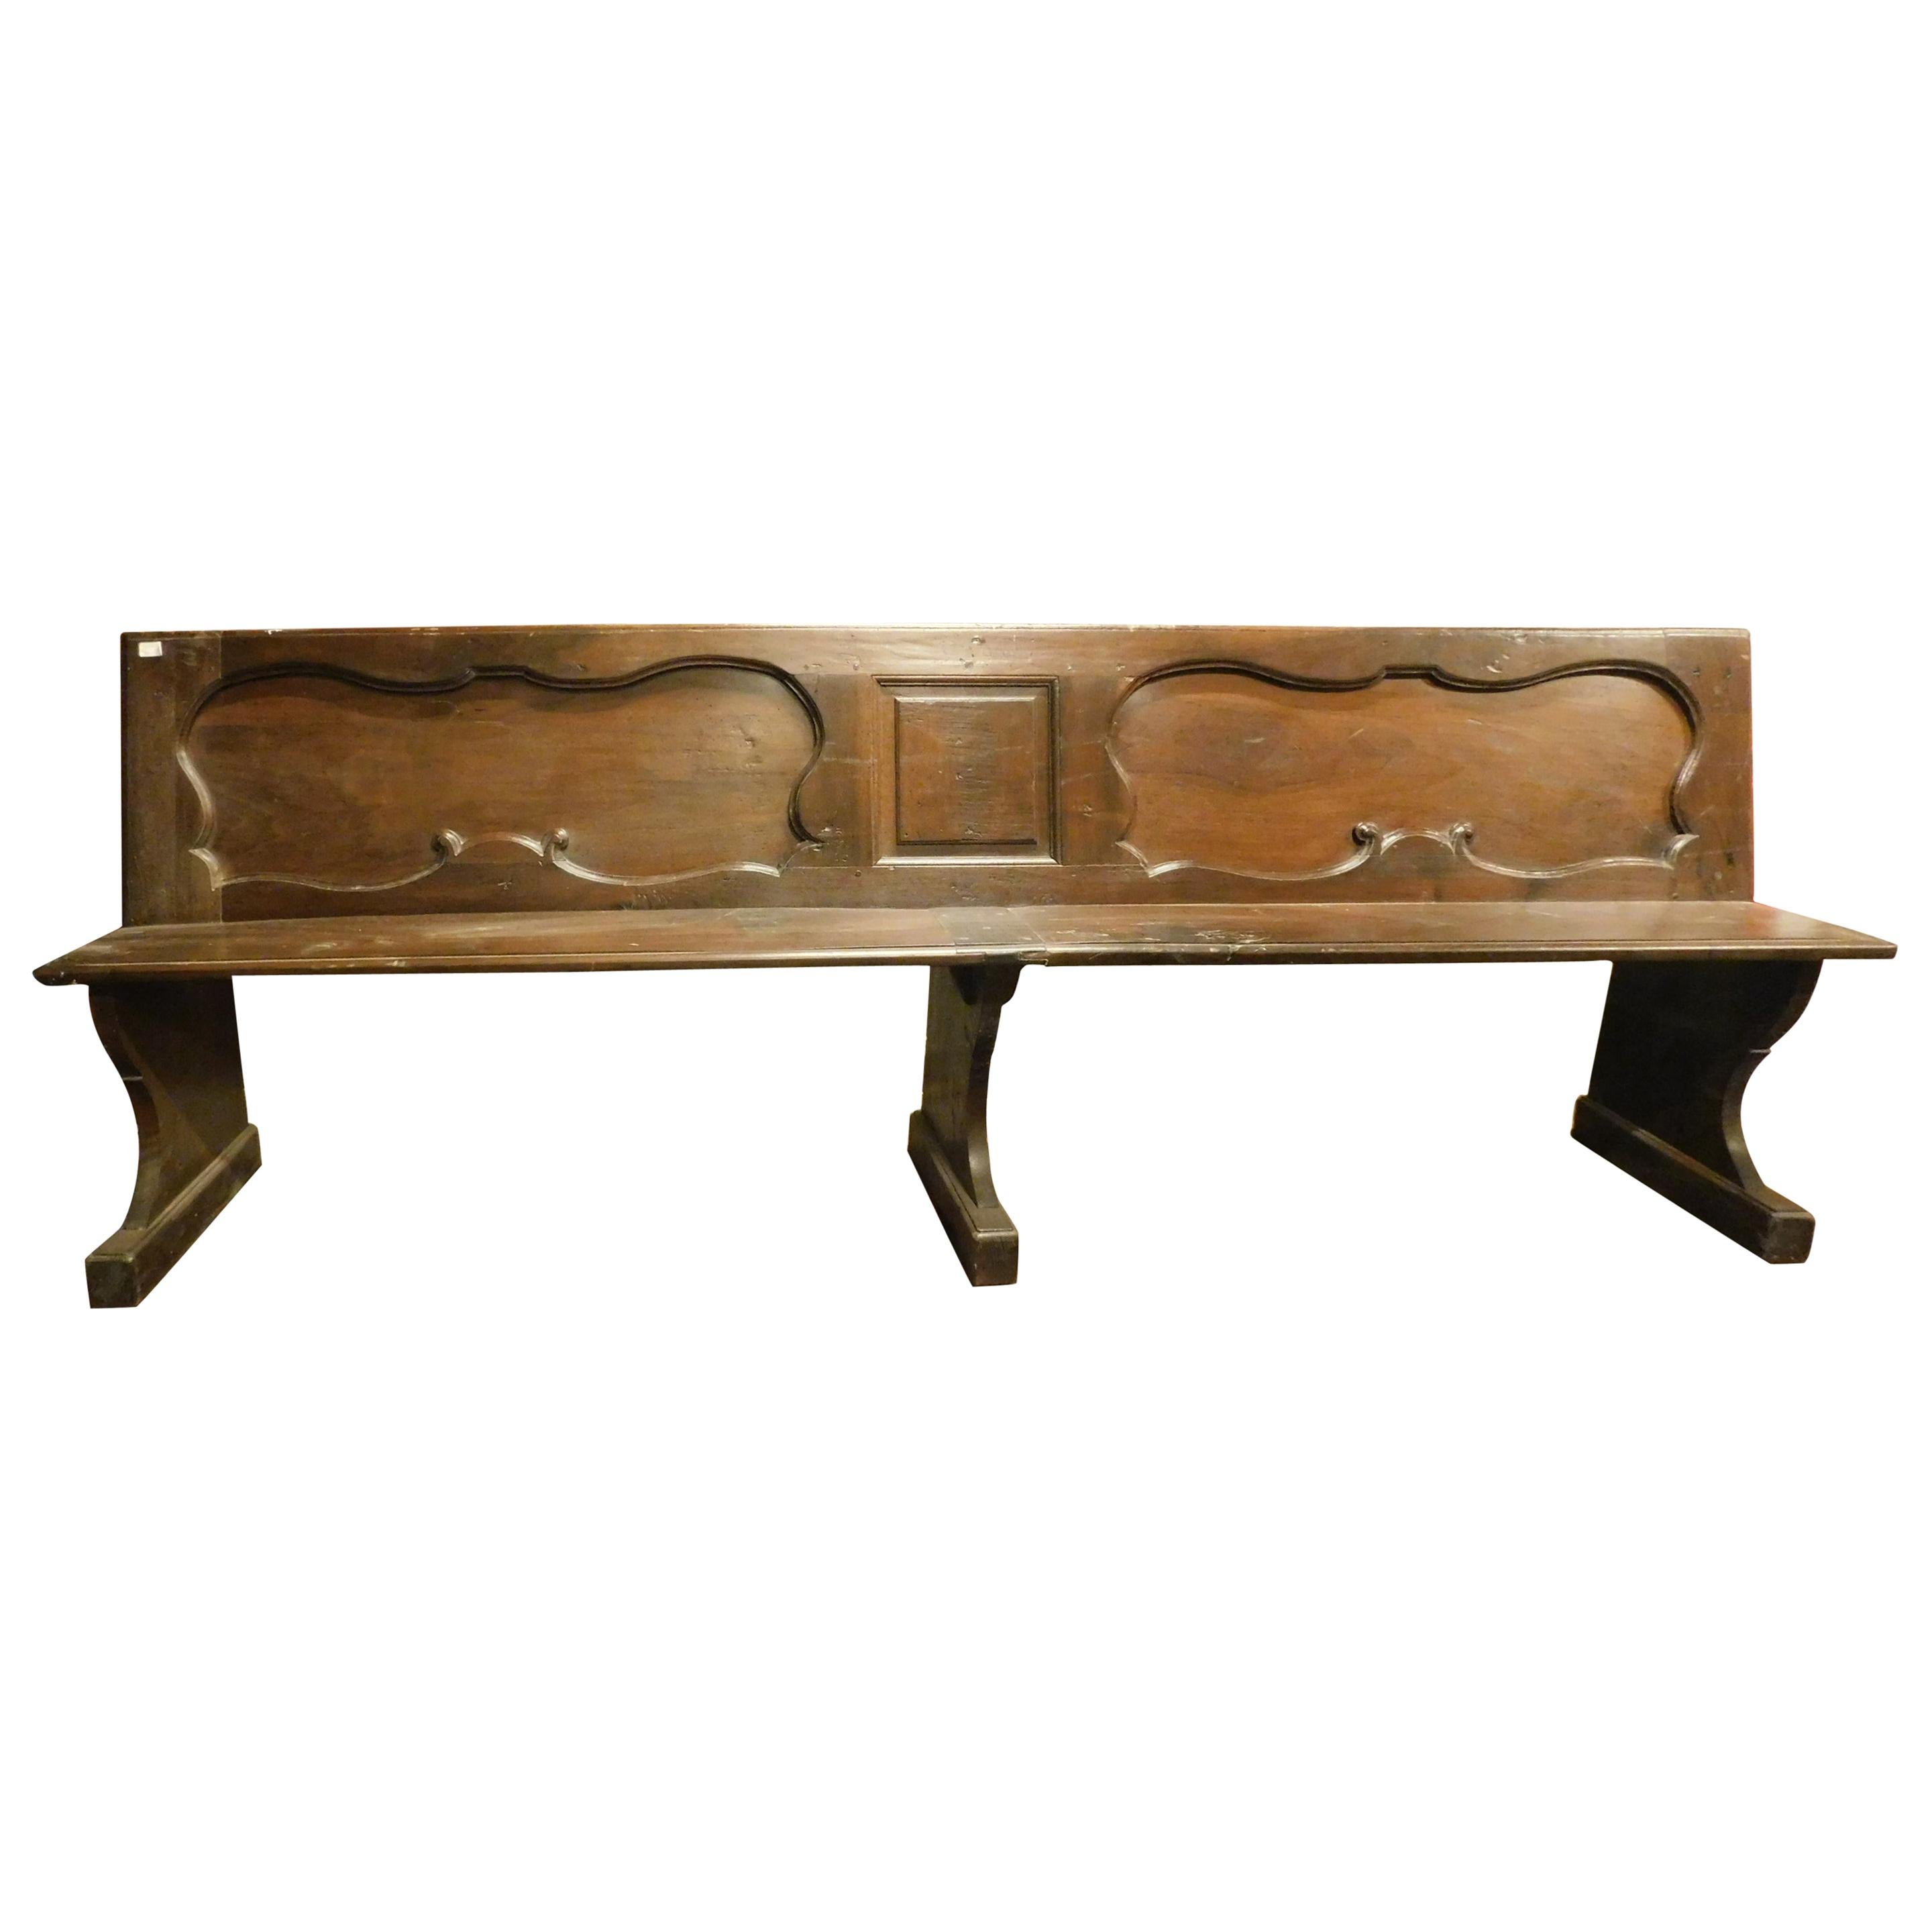 Antique Walnut Bench, Carved Panels, 18th Century, Italy